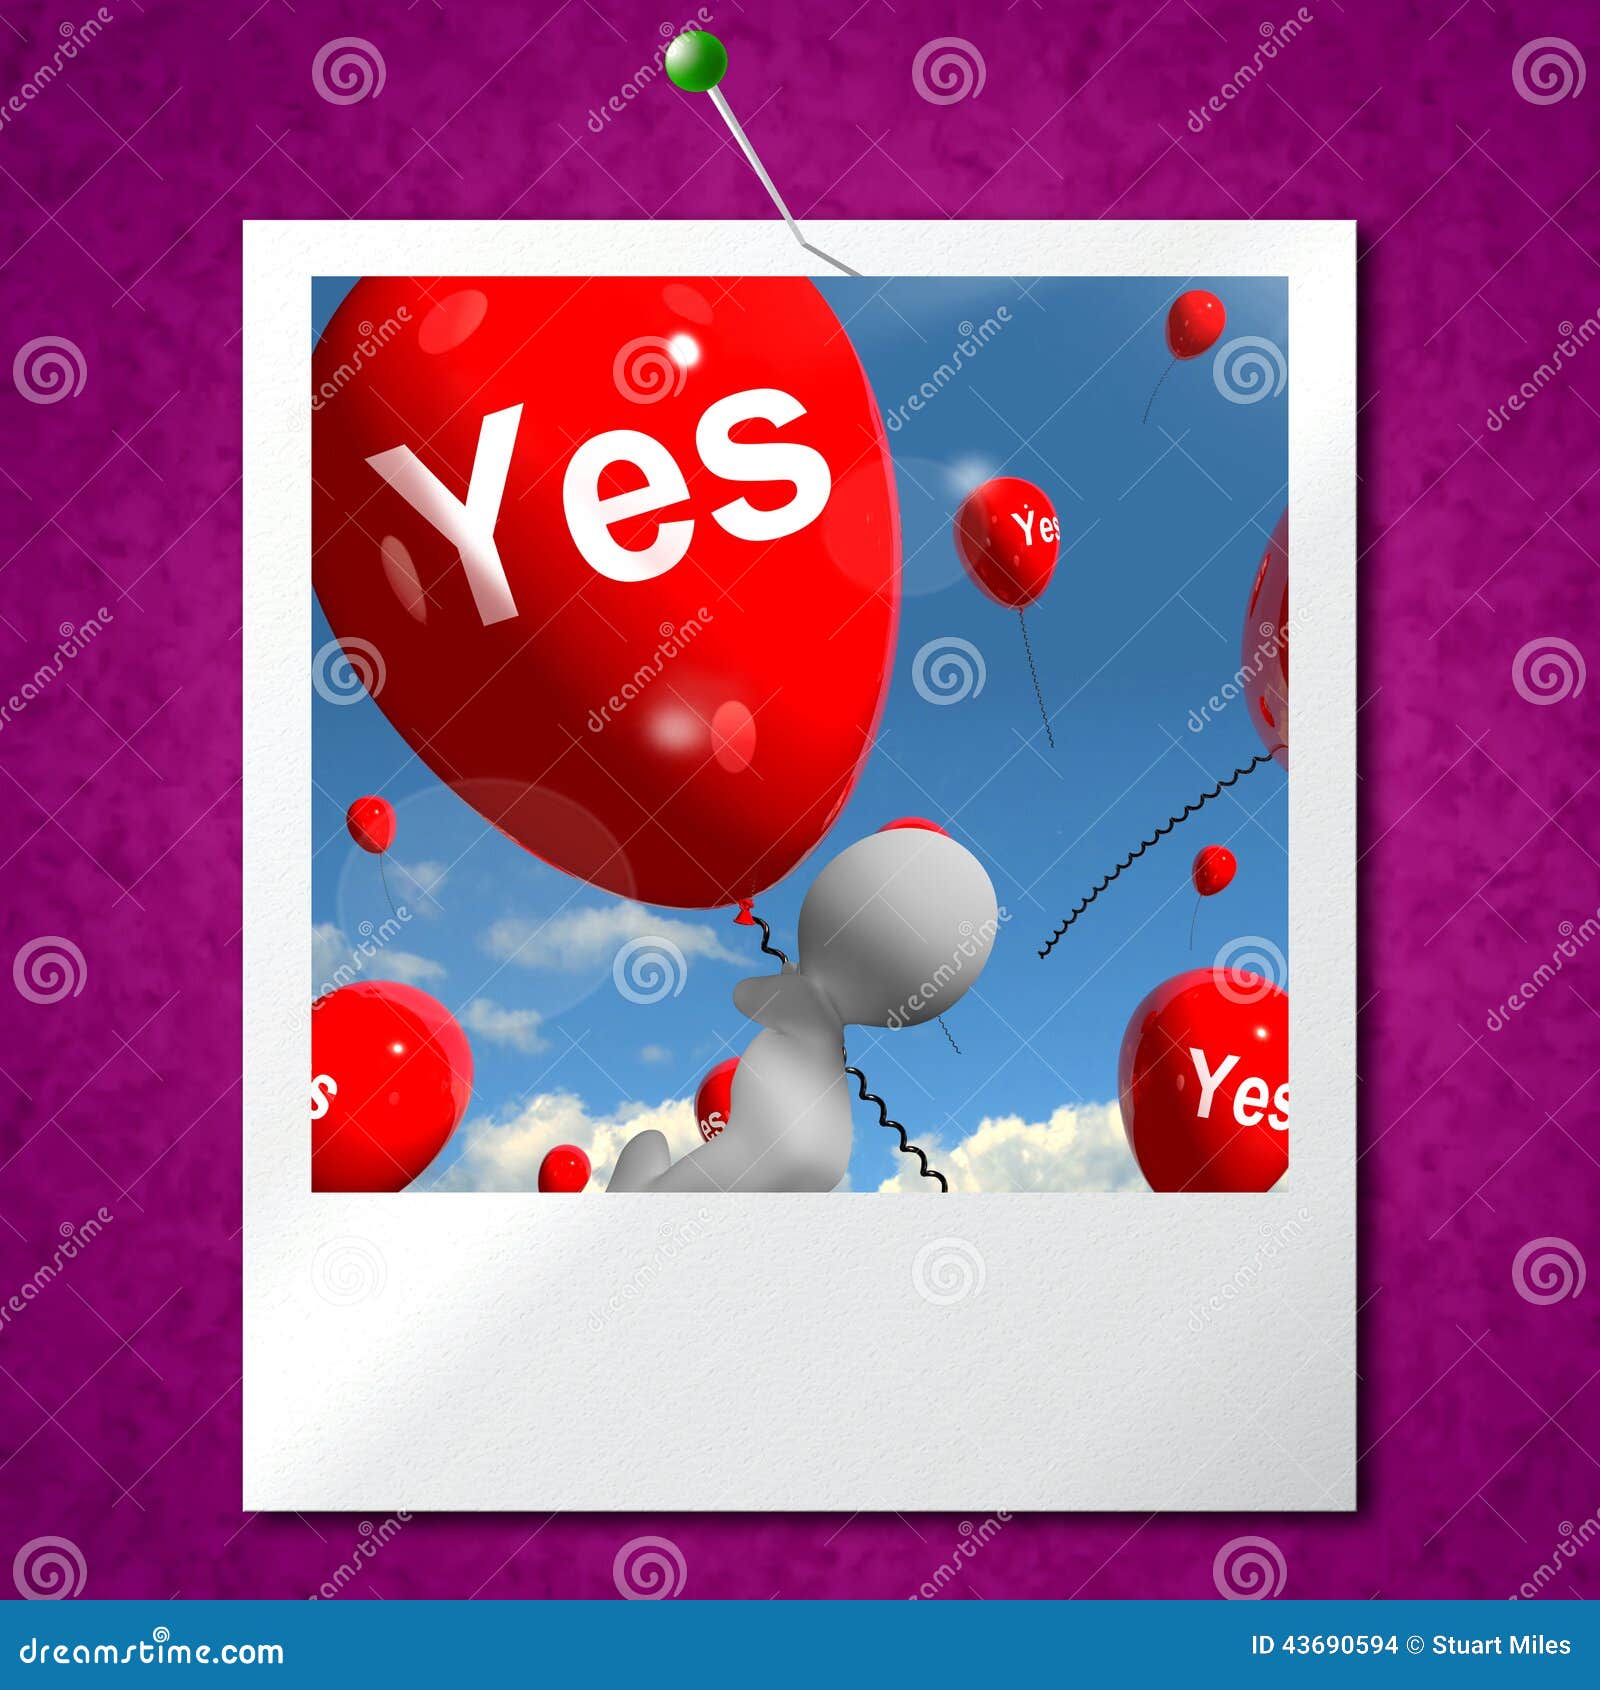 yes balloons photo means certainty and affirmative approval